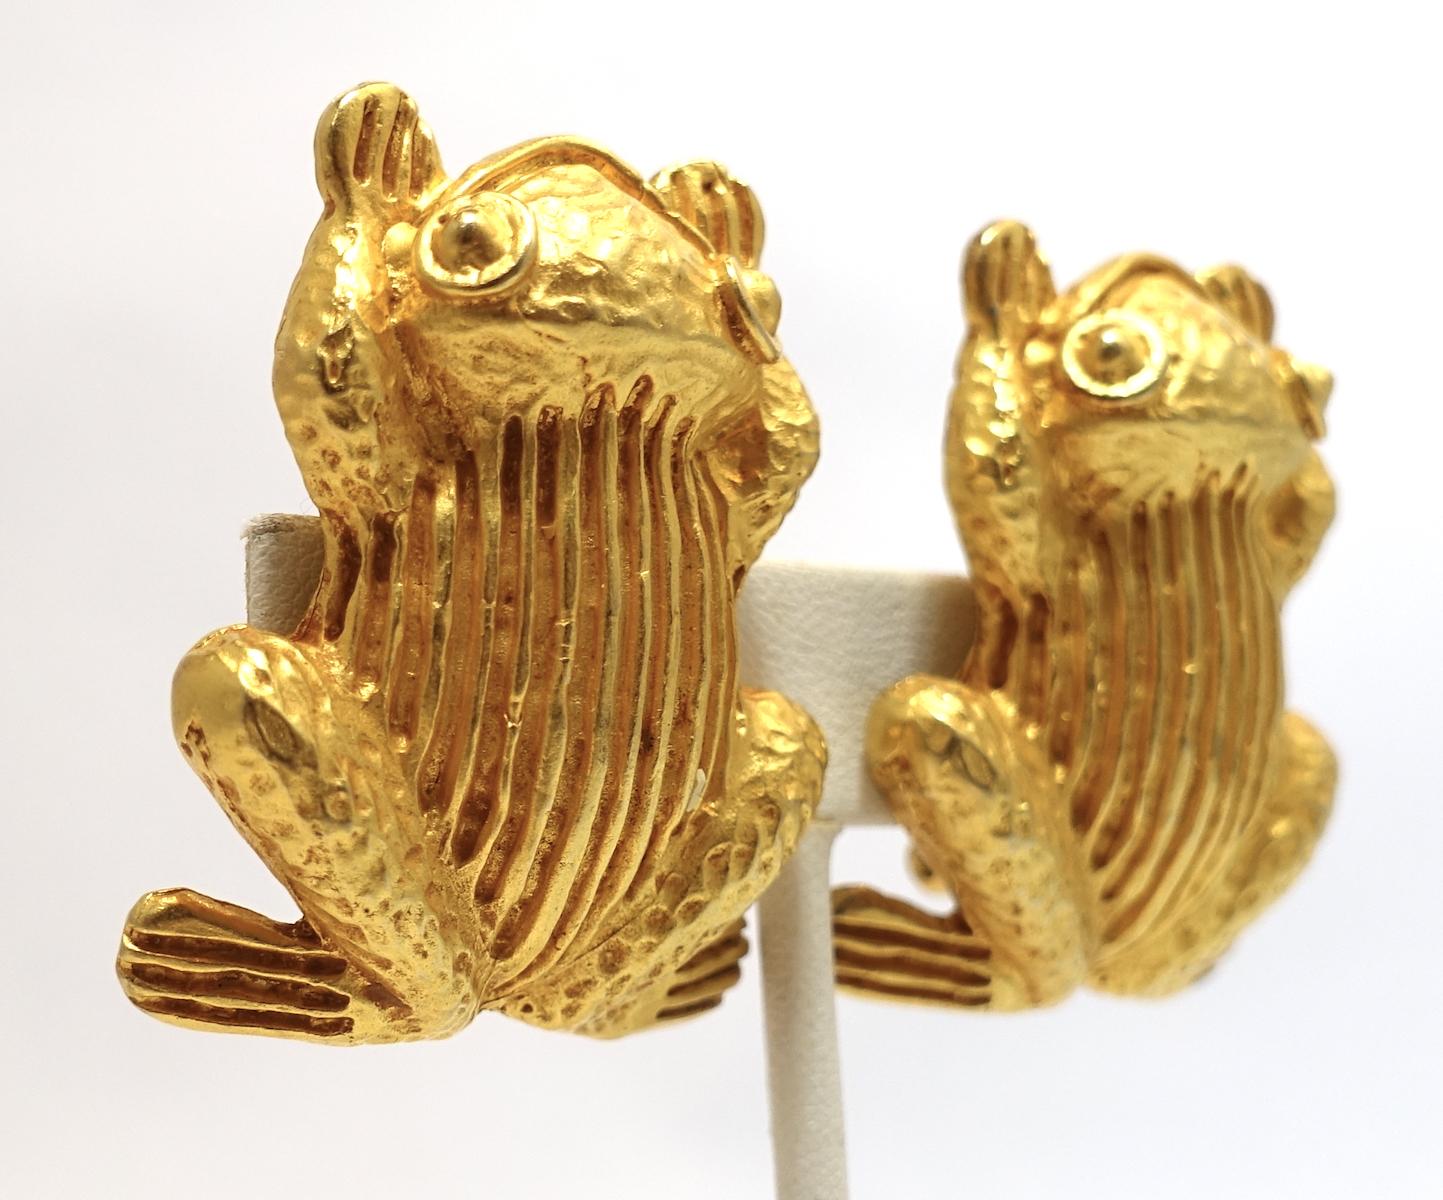 These vintage signed Dominique Aurientis Paris earrings feature a frog design in a gold tone setting,  These clip earrings measure 1-3/4” x 1-3/8” and are signed “Dominique Aurientis Paris”.  They are in excellent condition.